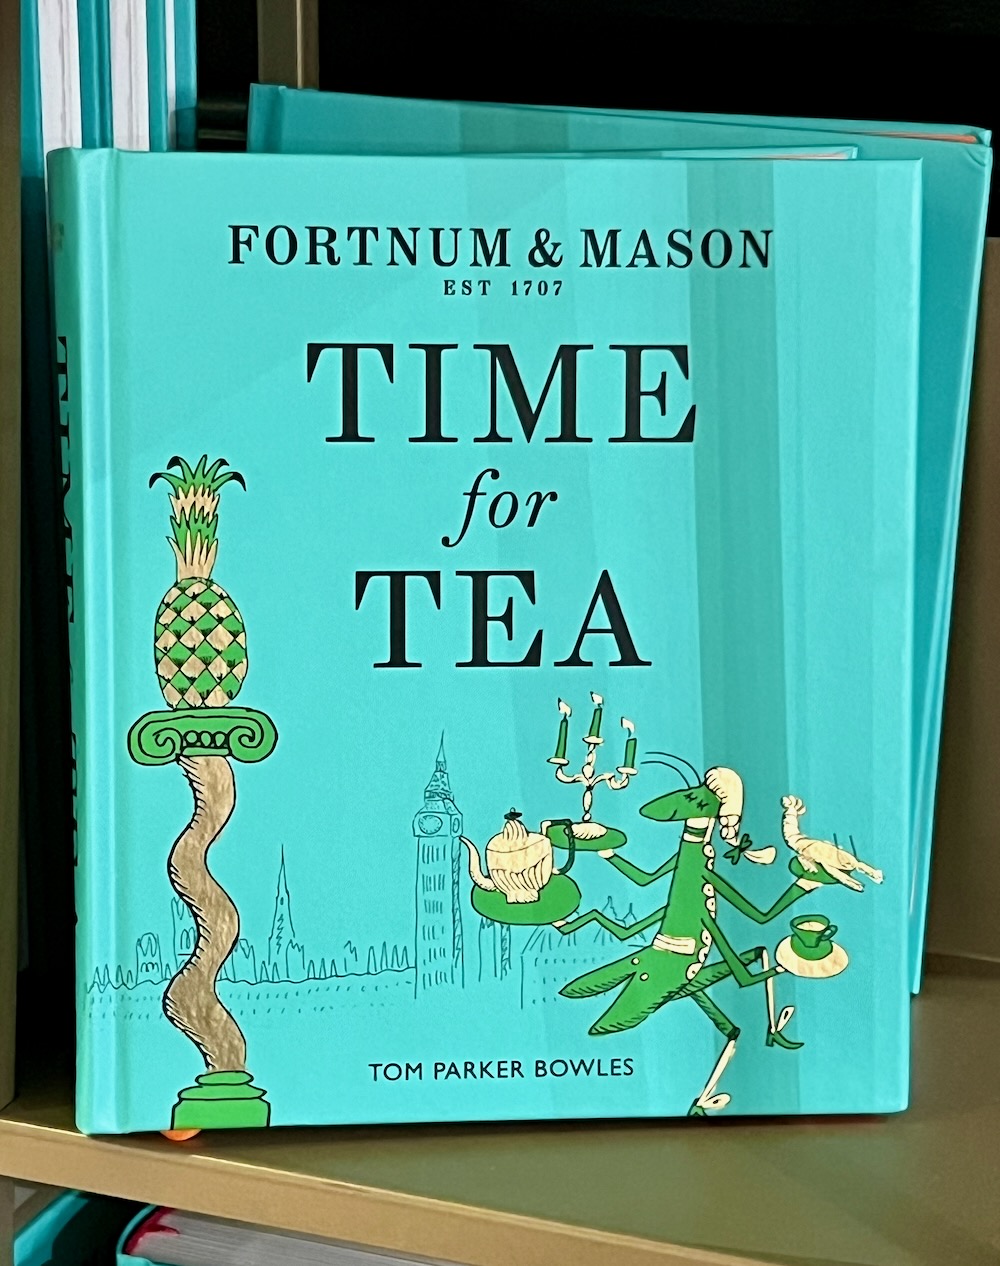 Time for Tea by Tom Parker Bowles. Photo Credit: © Ursula Petula Barzey.